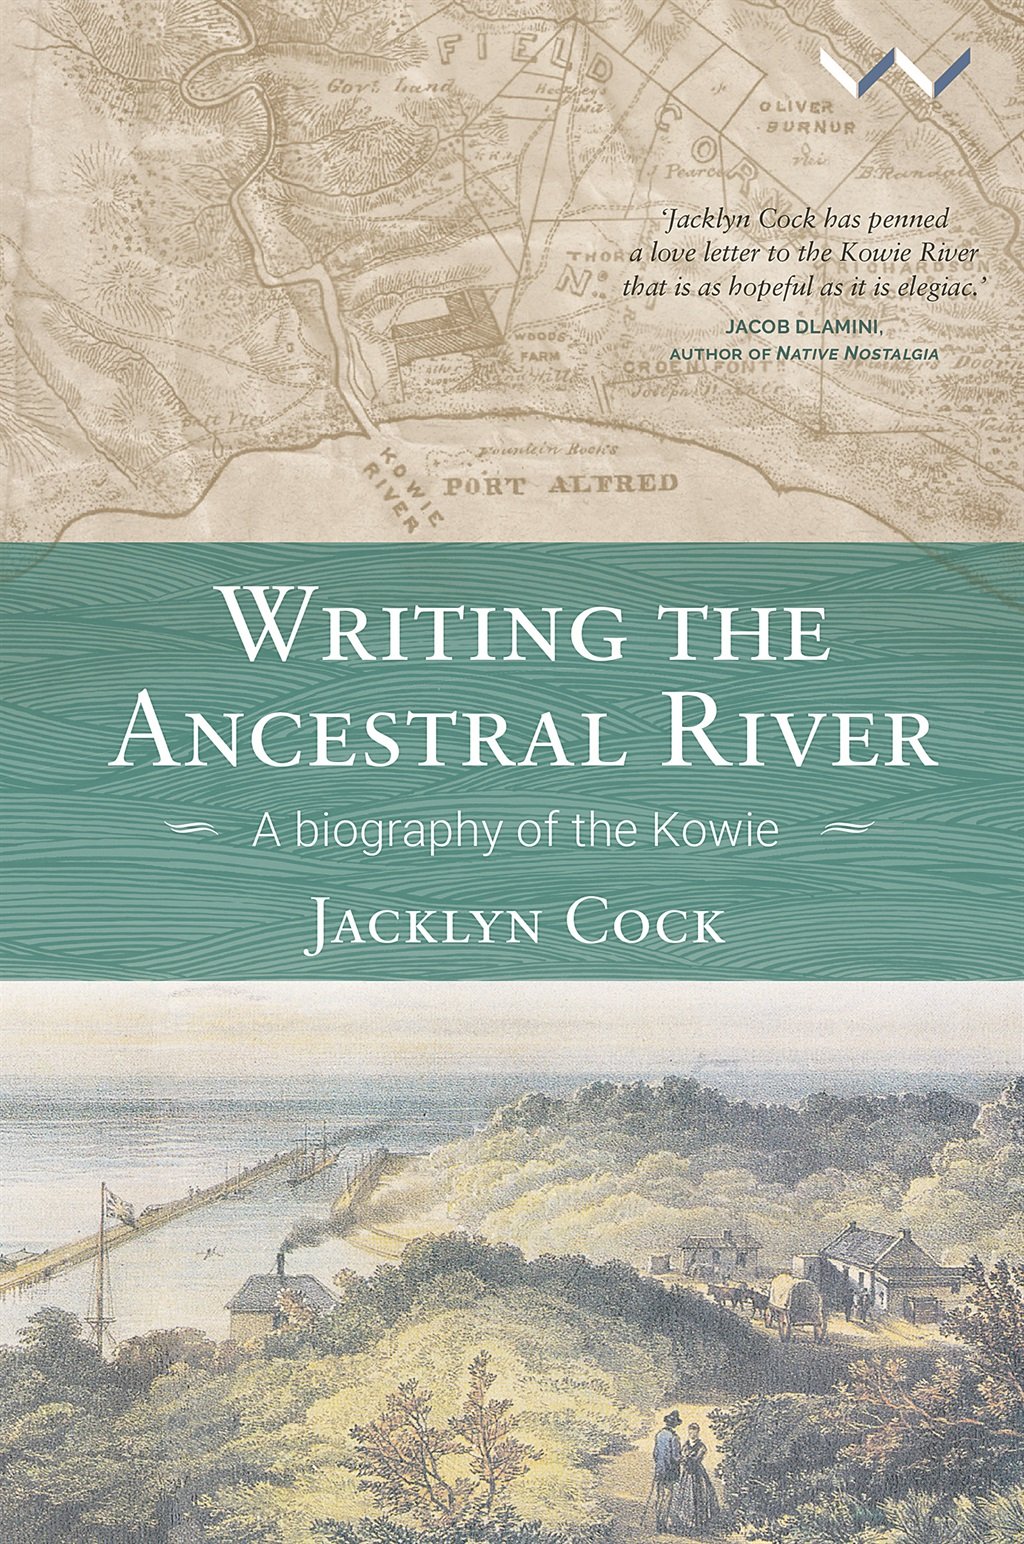 Writing The Ancestral River A biography of the Kowie by Jacklyn Cock 